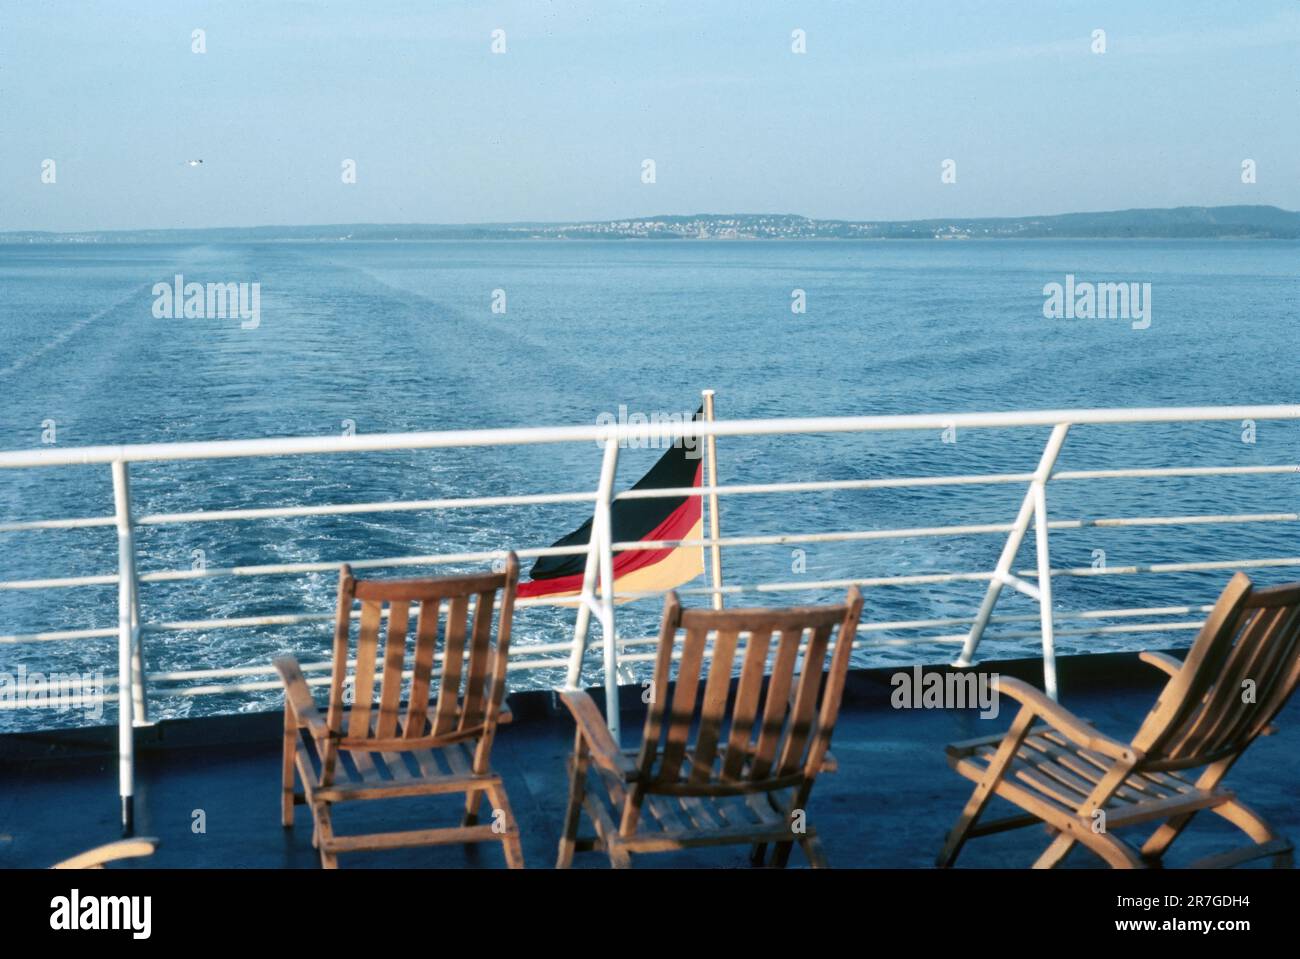 Ferry deck chairs and view- View from ferry boat deck at the Skagerrak Sea, Denmark to Norway Stock Photo